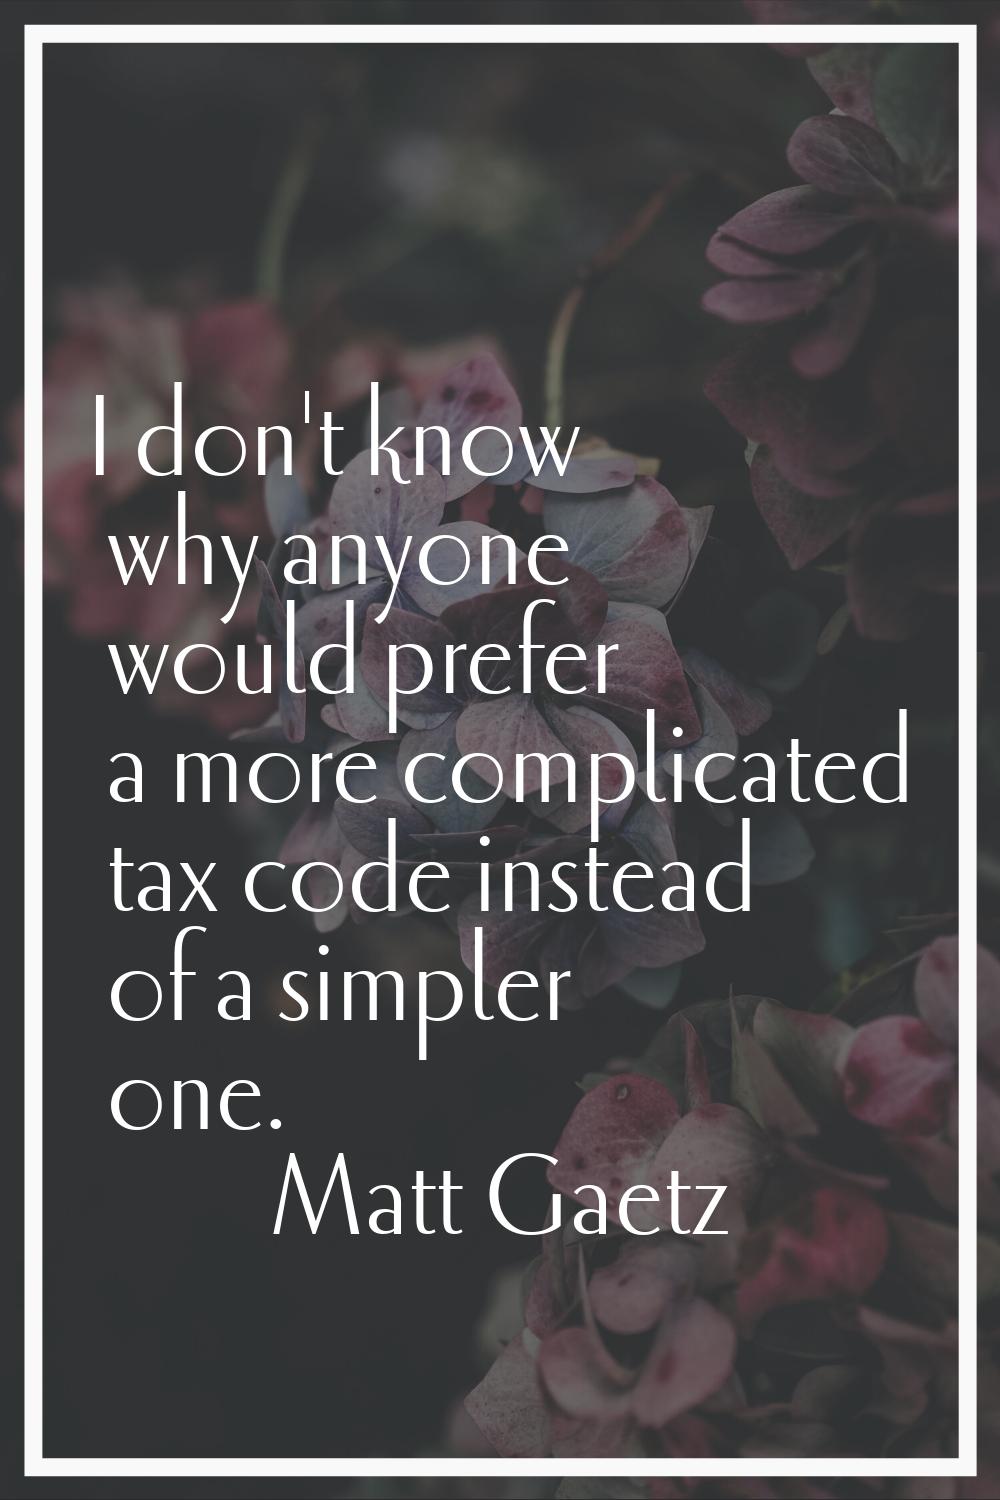 I don't know why anyone would prefer a more complicated tax code instead of a simpler one.